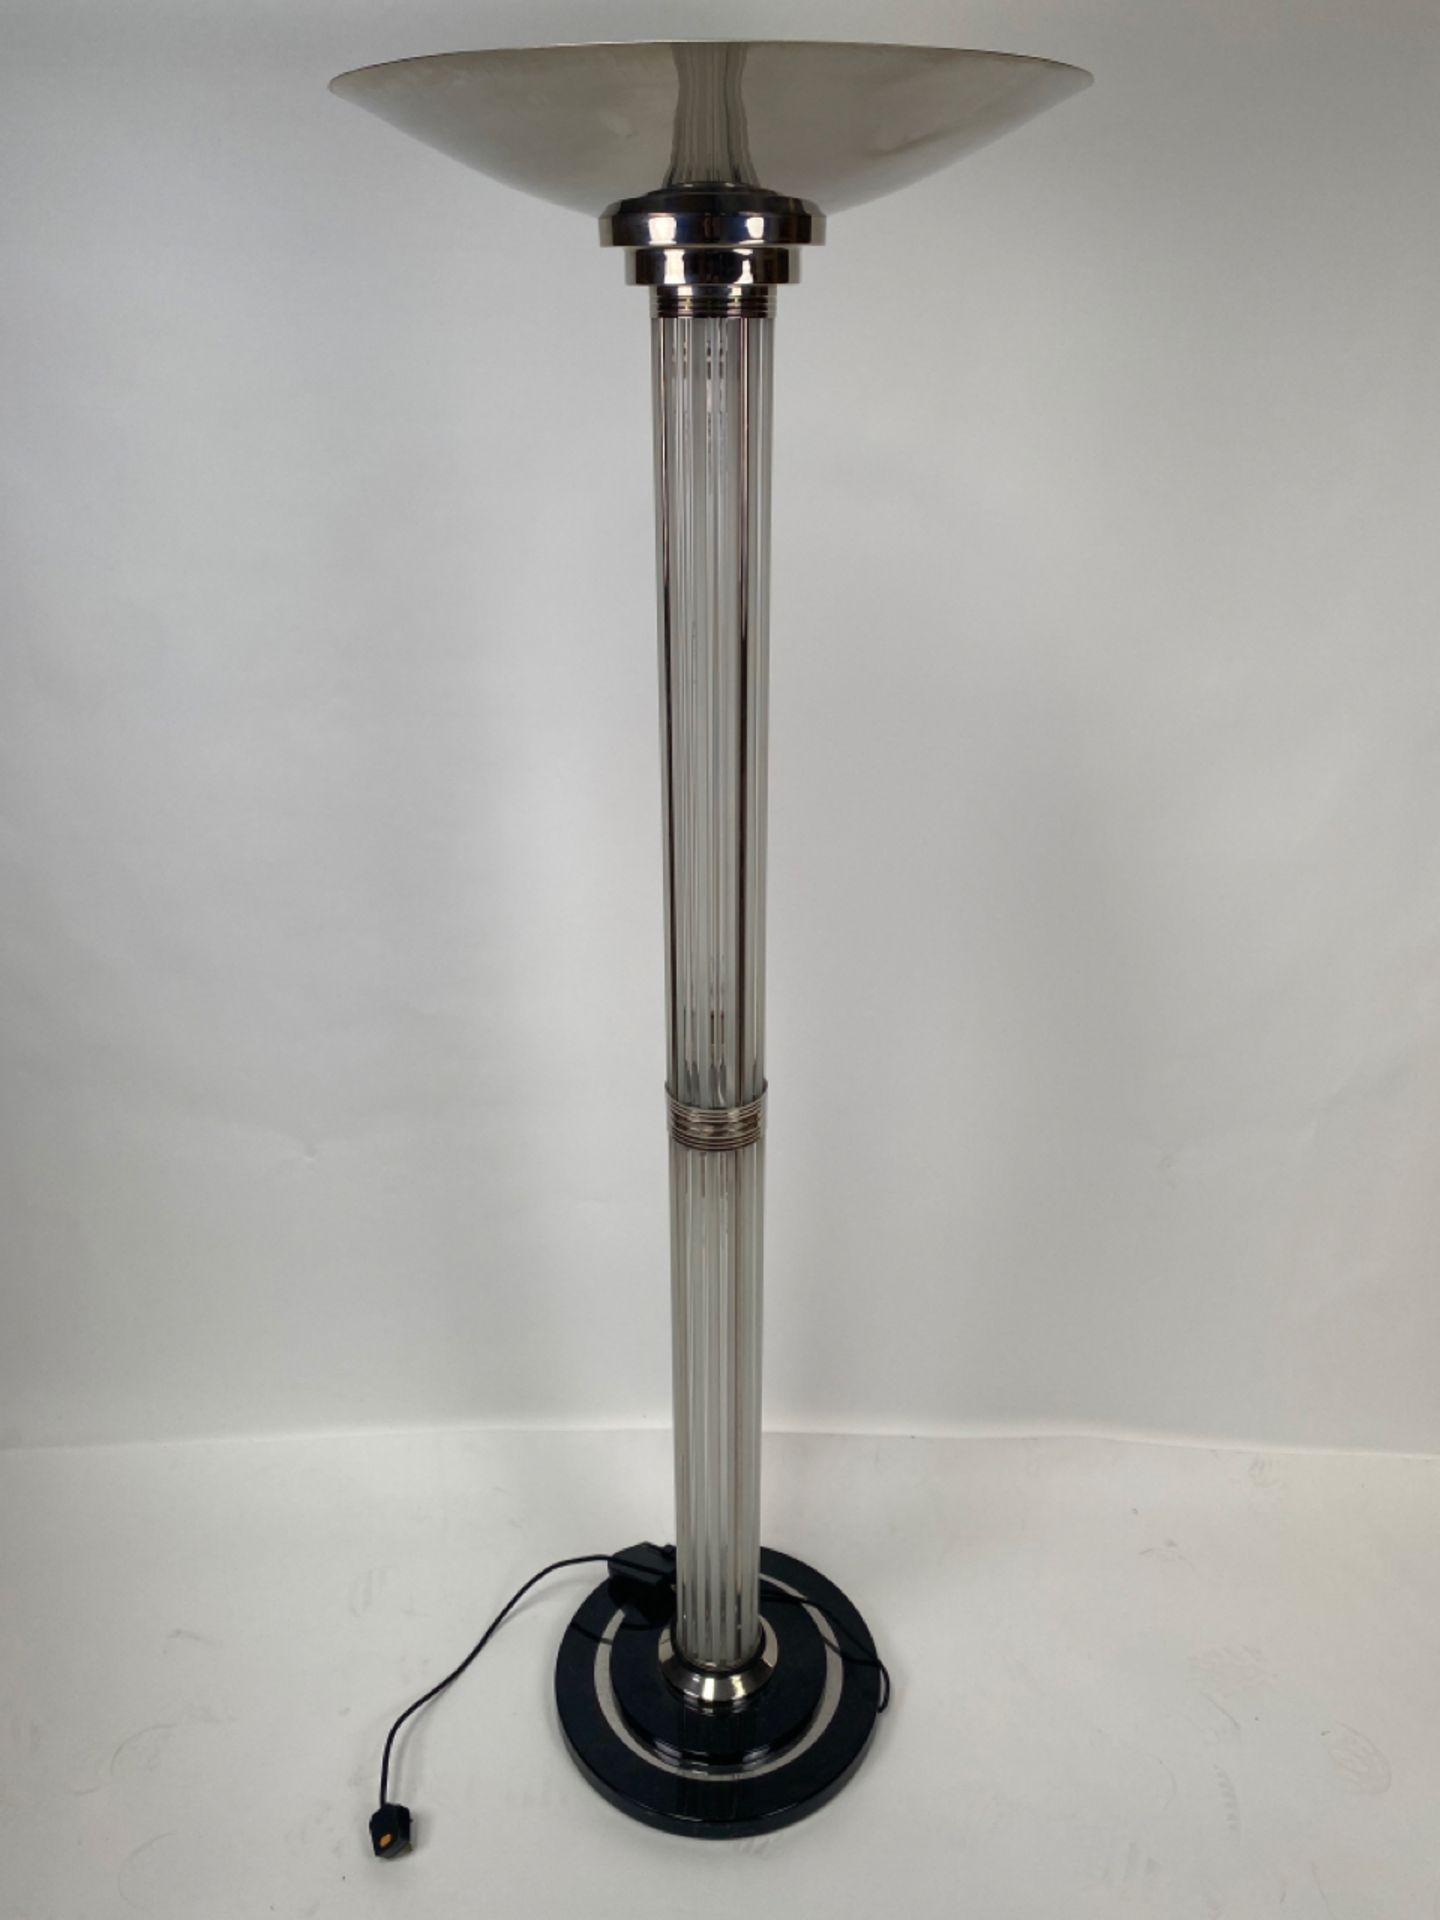 Art Deco Style Model le Mons Glass Rods, Chrome, and Black Lacquer Floor Lamp - Image 5 of 11